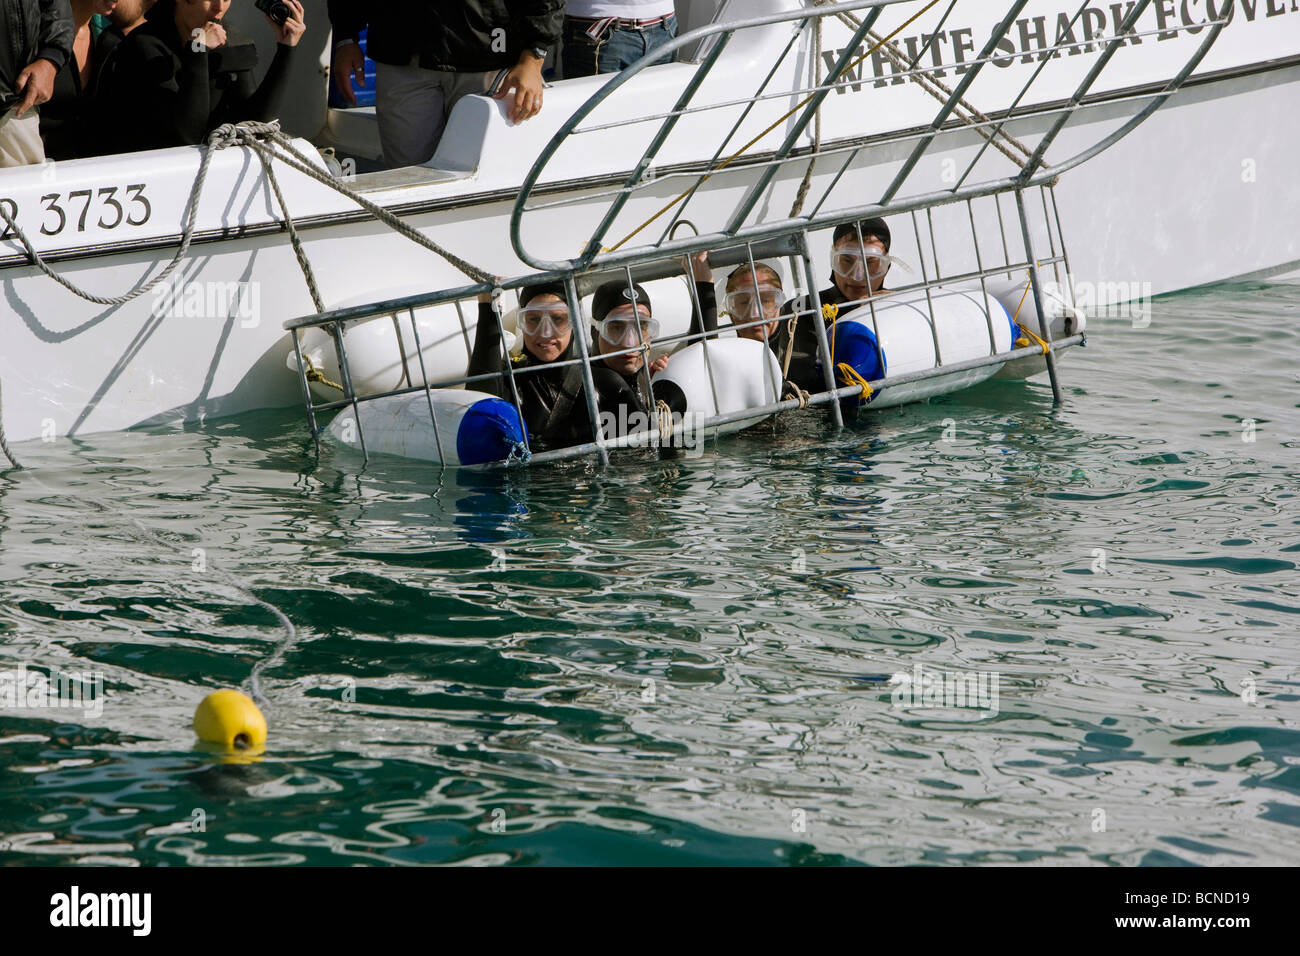 People in cage form boat for Shark Cage diving in sea Stock Photo